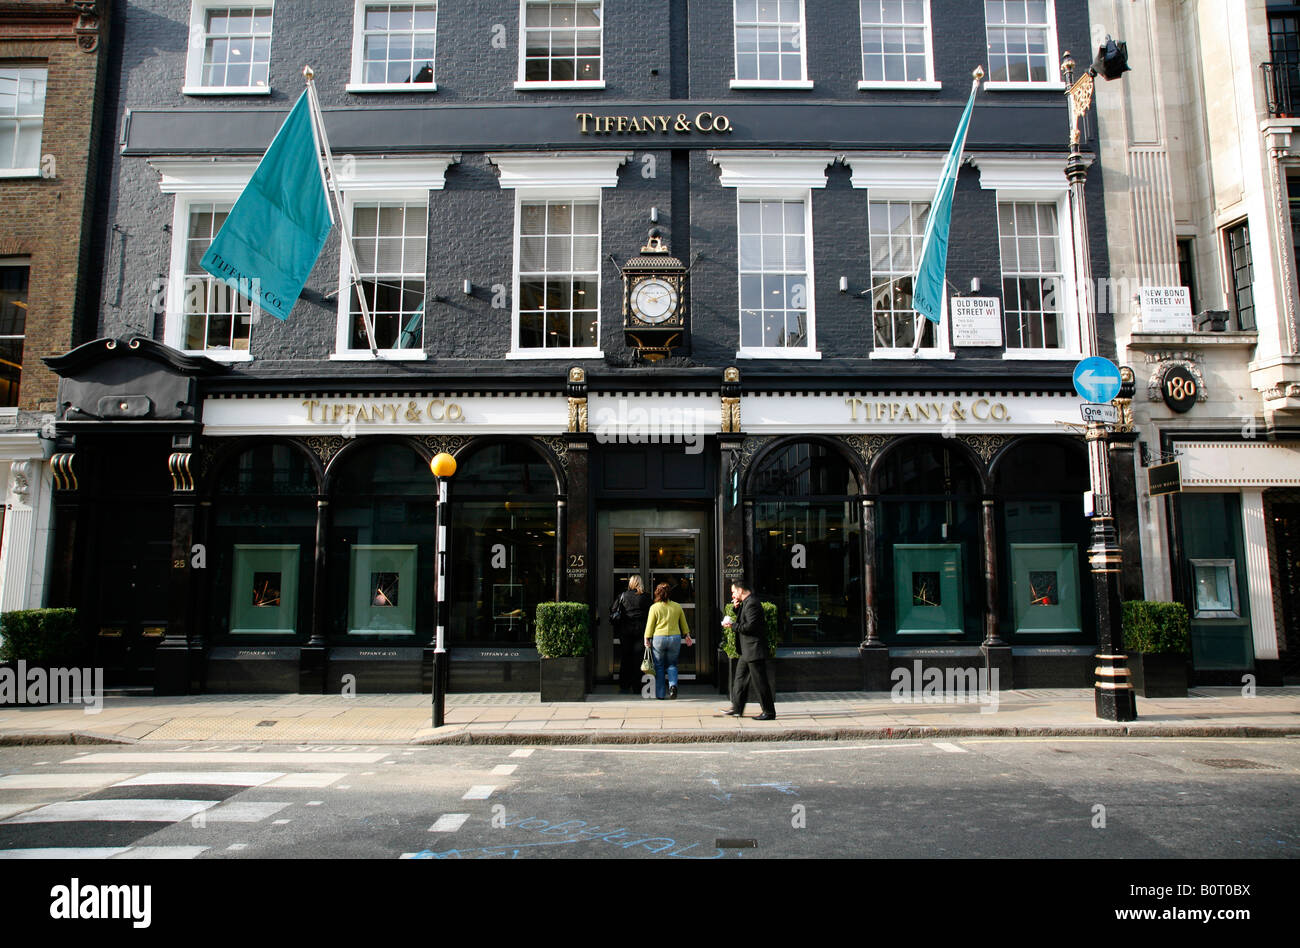 Tiffany London High Resolution Stock Photography and Images - Alamy